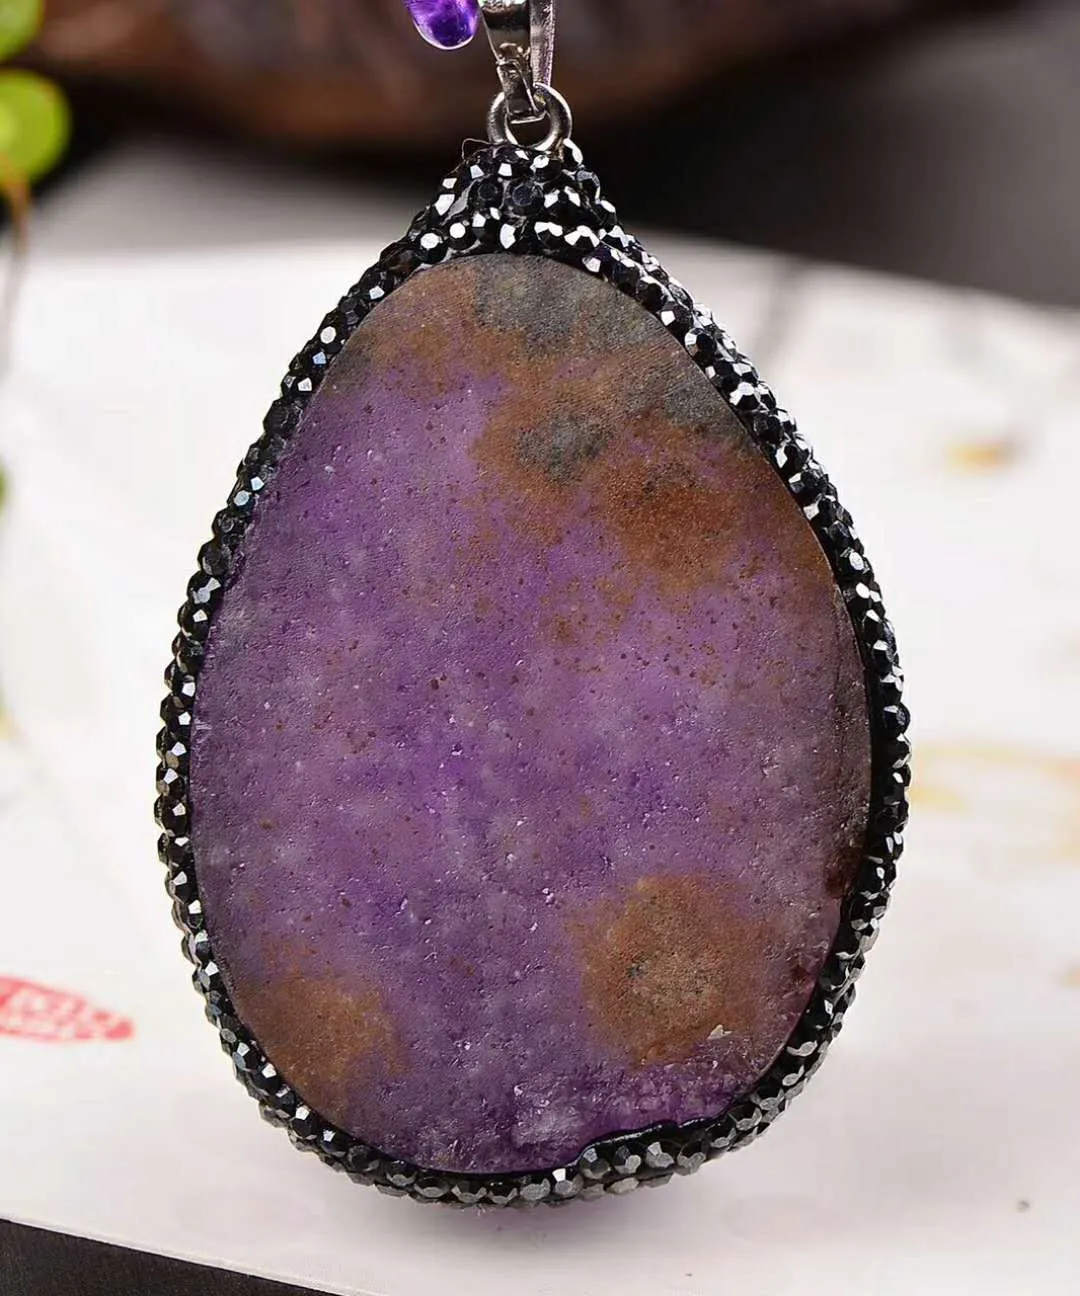 lovely beautiful Natural amethyst cluster pendant agate crystal necklace special crystal haling crystal giftcolor purple8101579